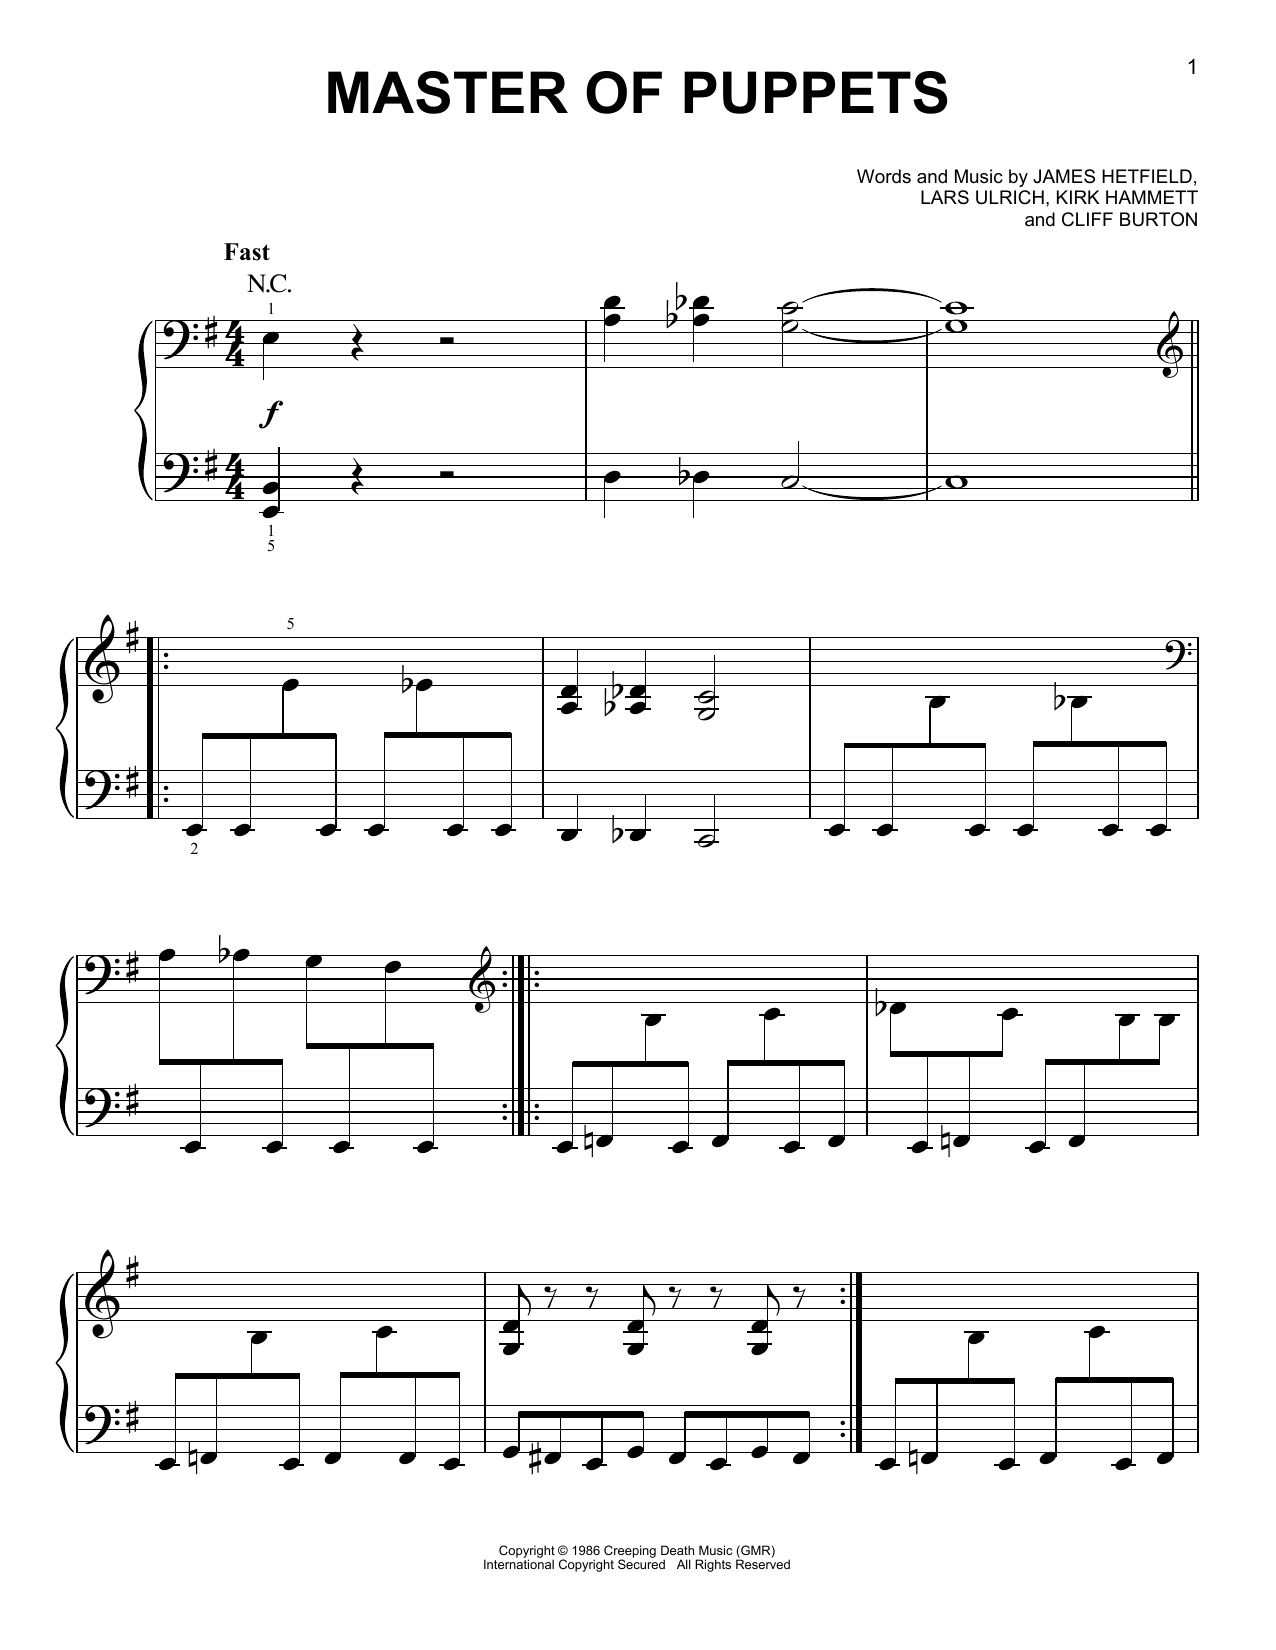 Master Of Puppets Sheet Music by Metallica for Piano/Keyboard | Noteflight